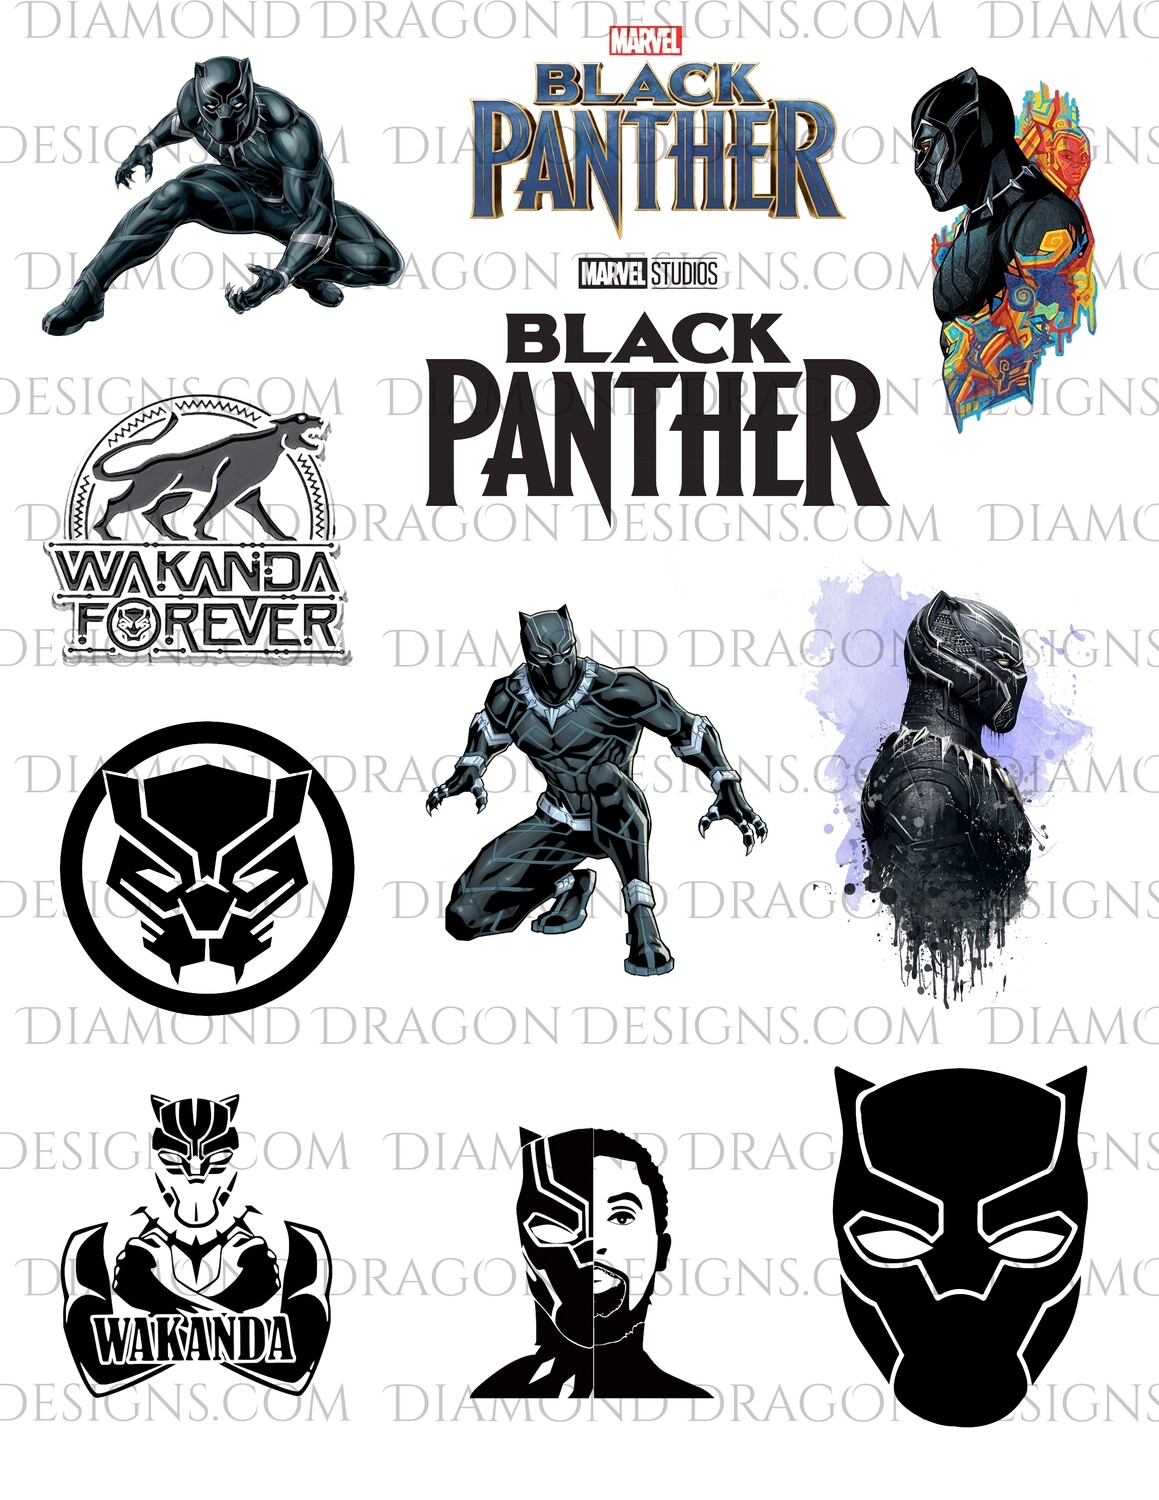 Movies - Black Panther Movie Inspired, Chadwick Boseman, Collage, Full Page, 1 Digital Image